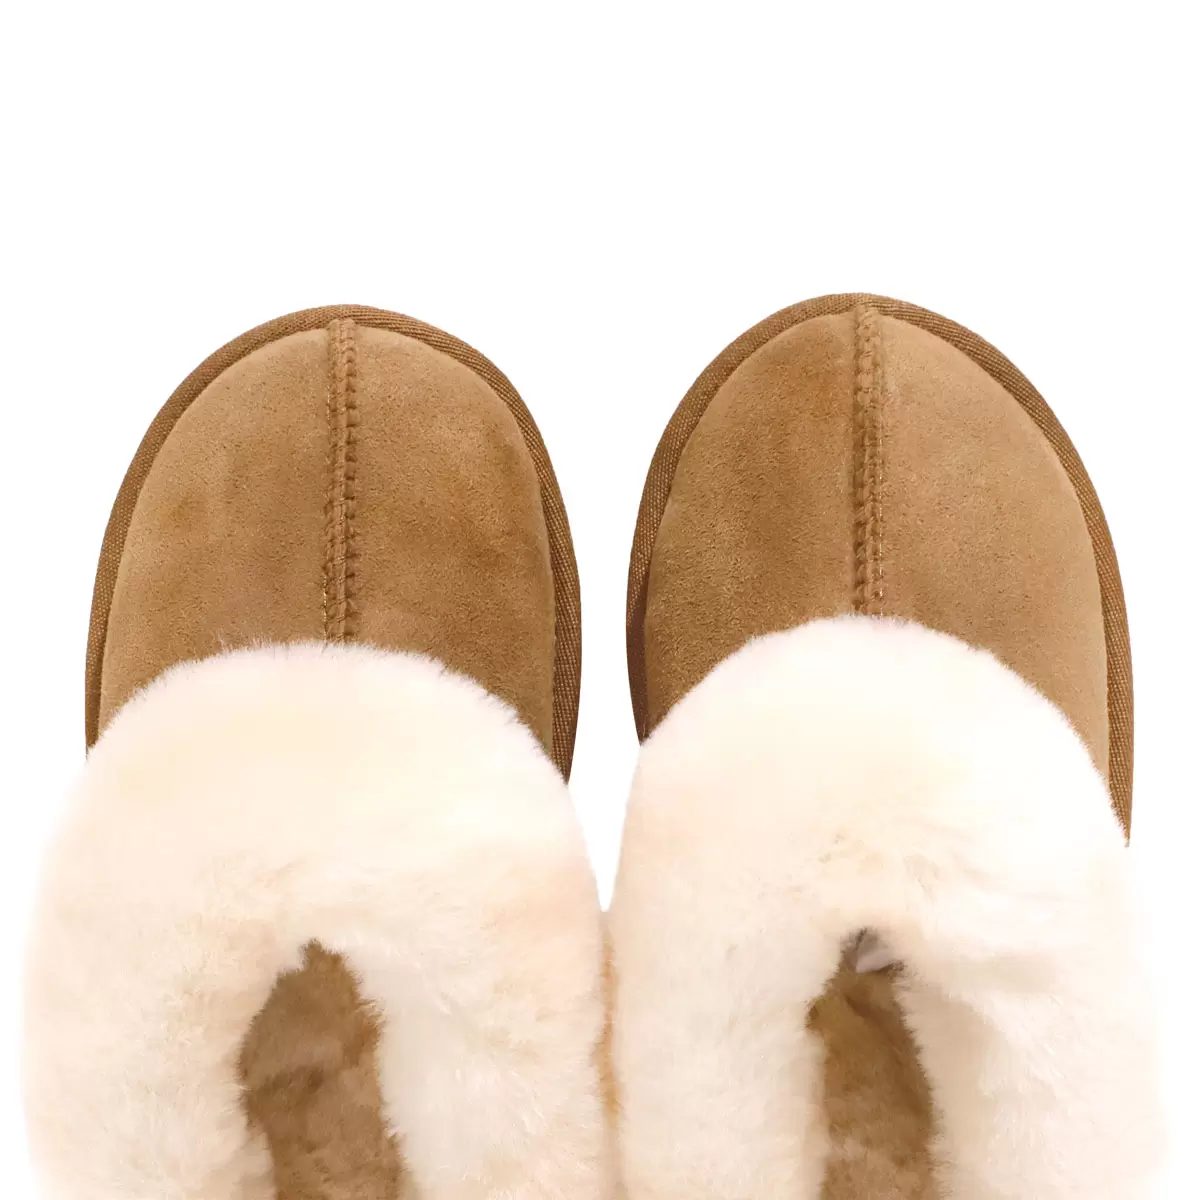 Kirkland Signature Women's Shearling Slippers in 2 Colours and 5 Sizes